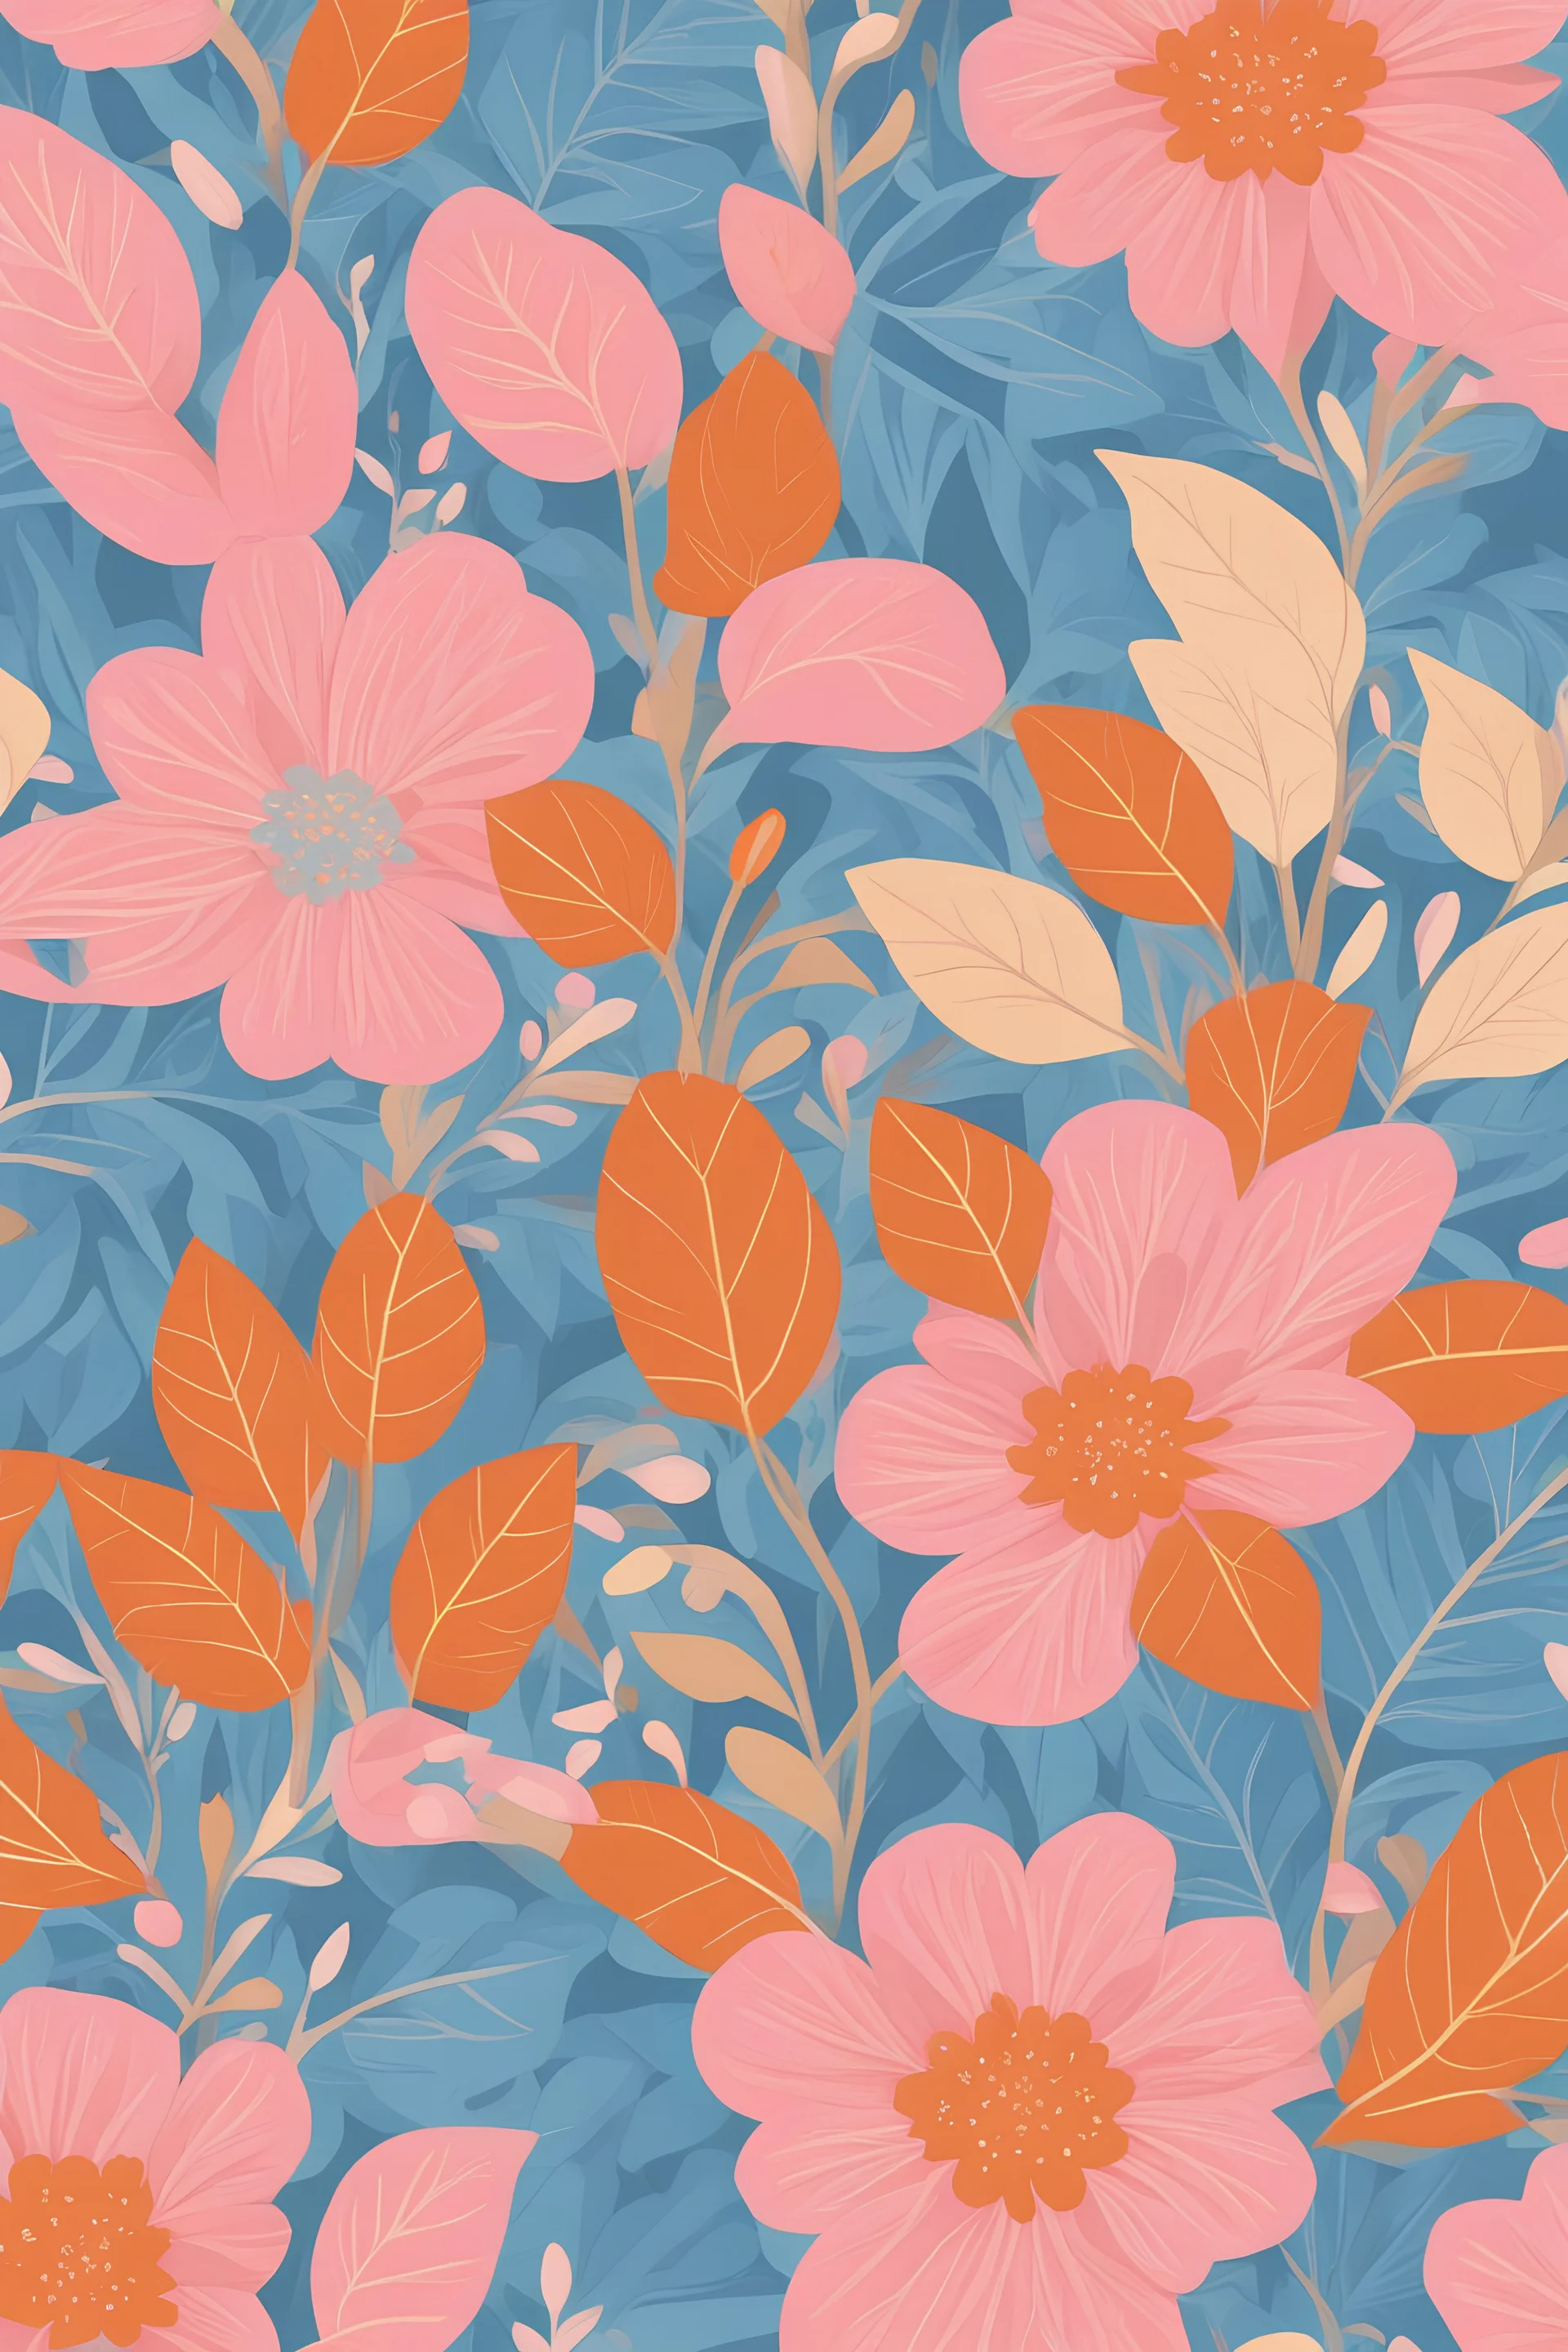 flowers and leaves design pattern featuring pink, orange, light blue and gold